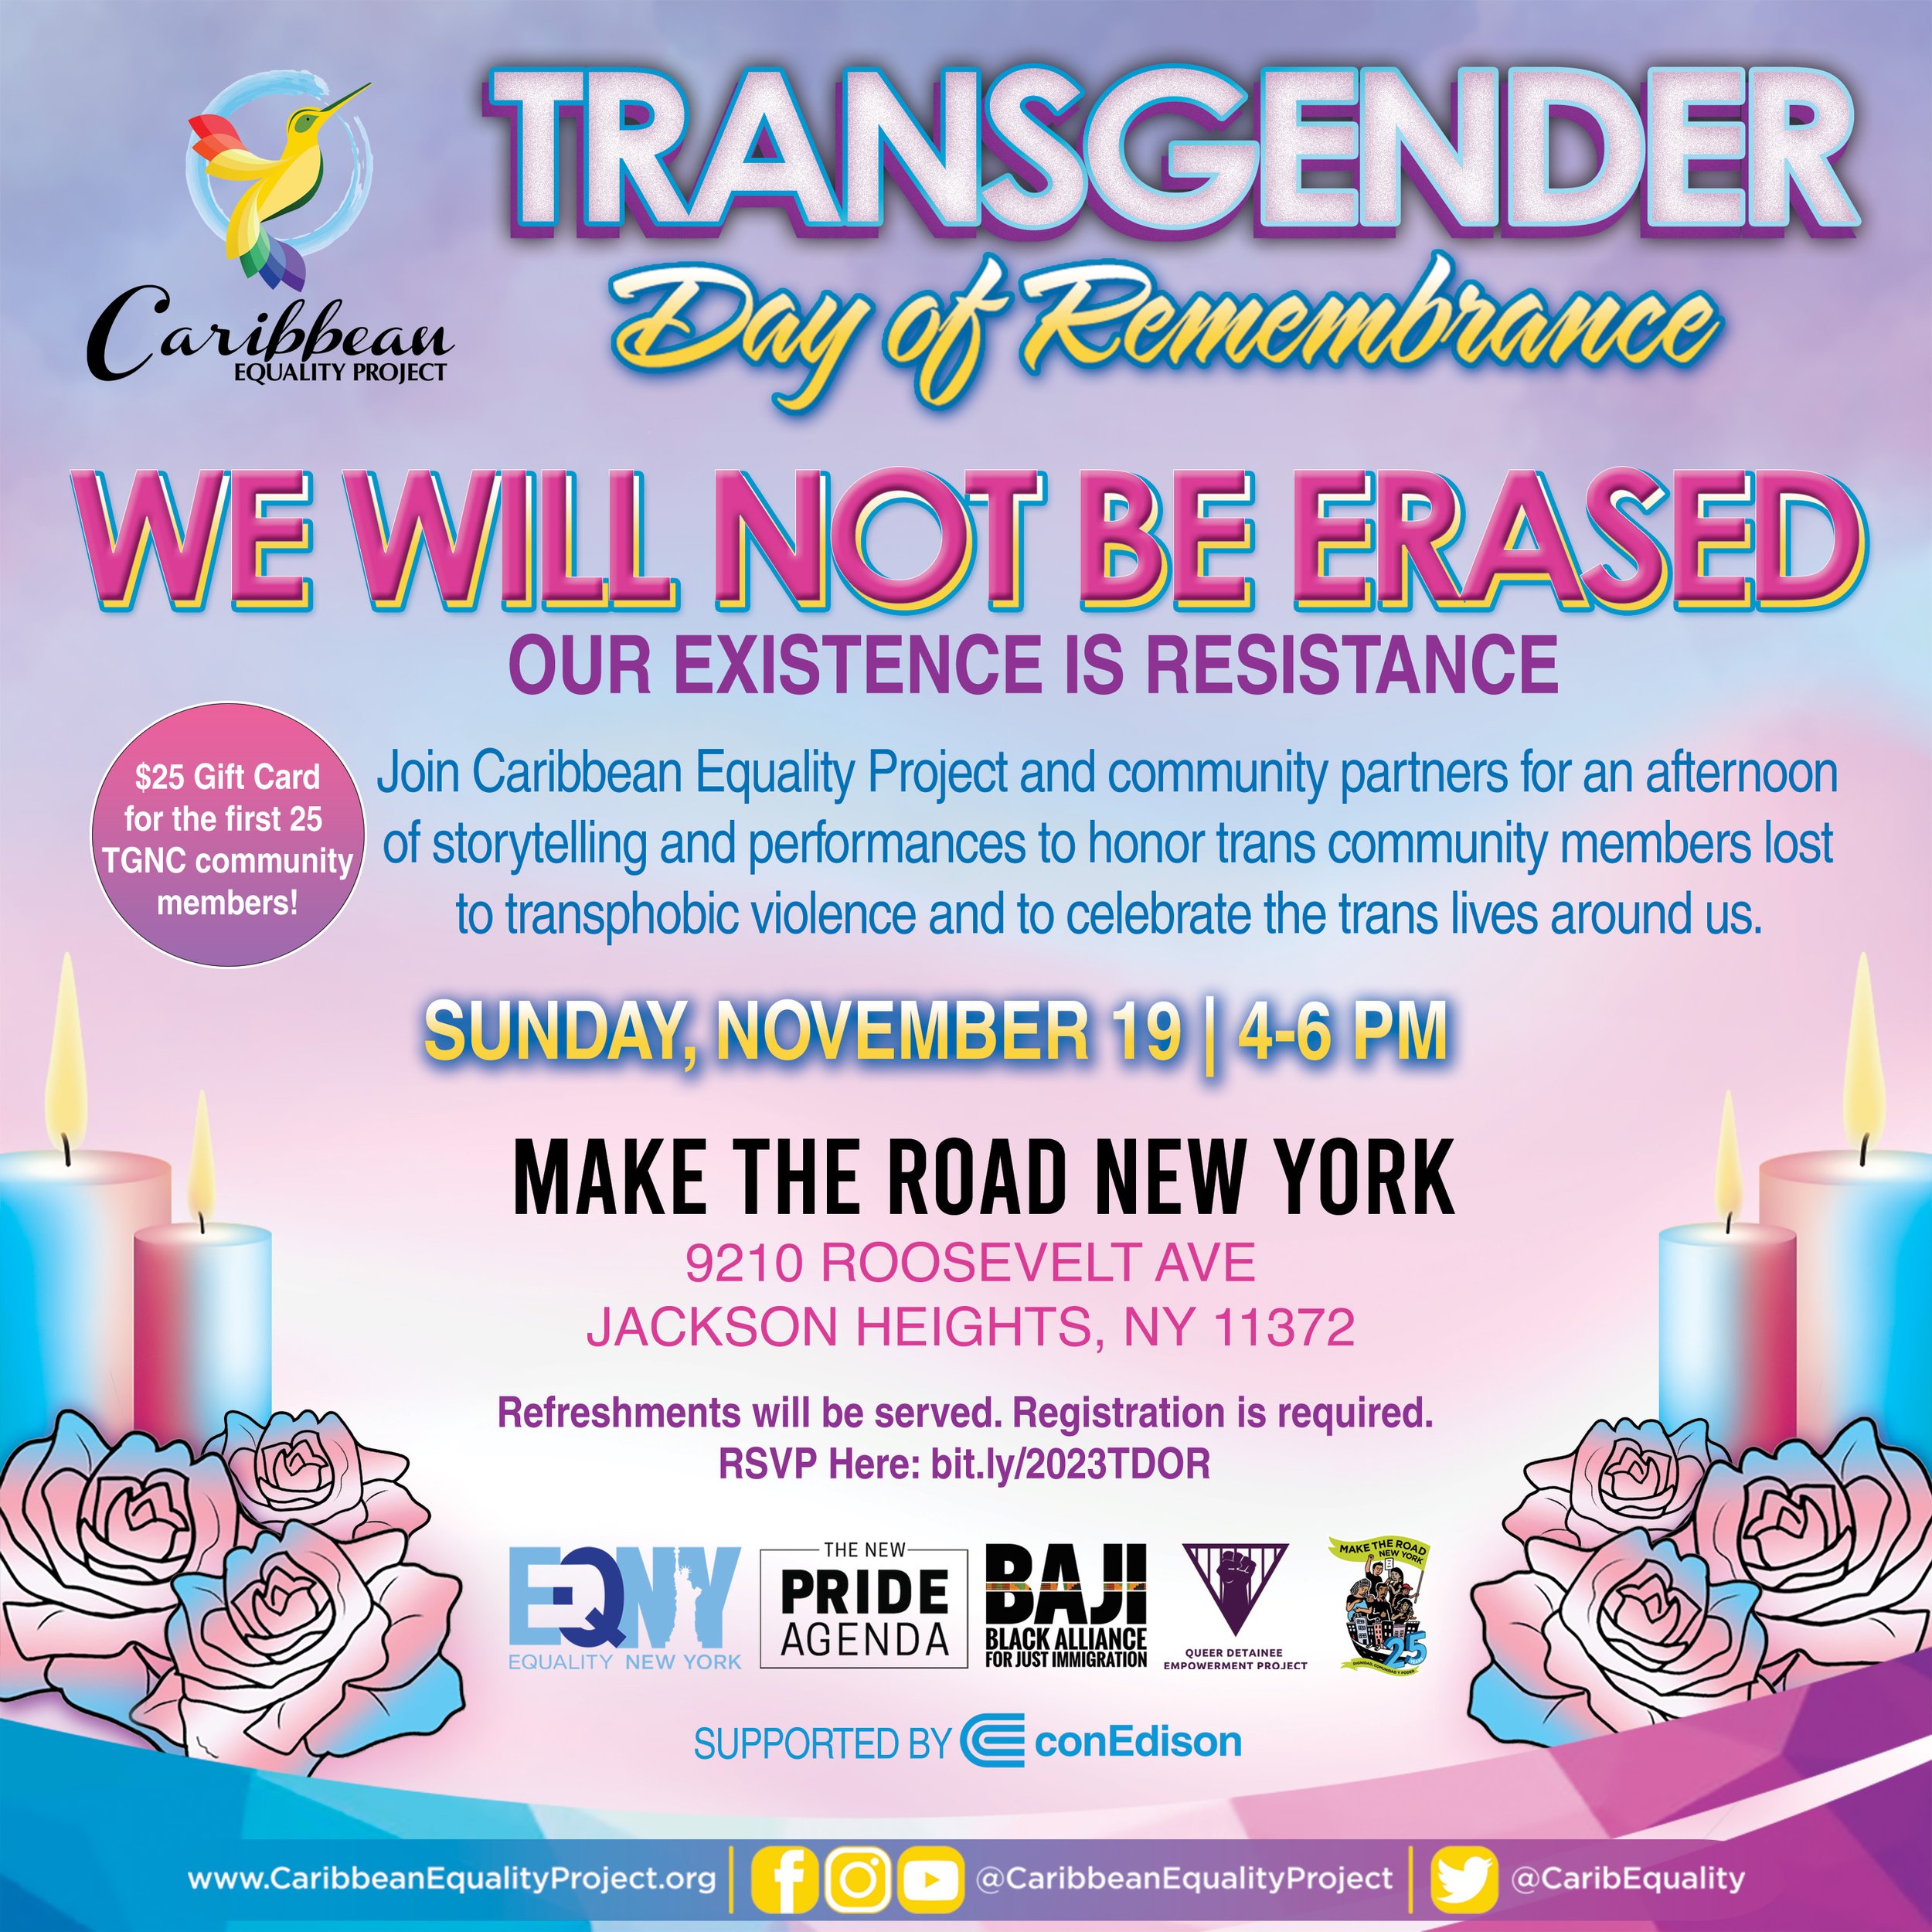 Transgender Day of Remembrance: We Will Not Be Erased (Copy)